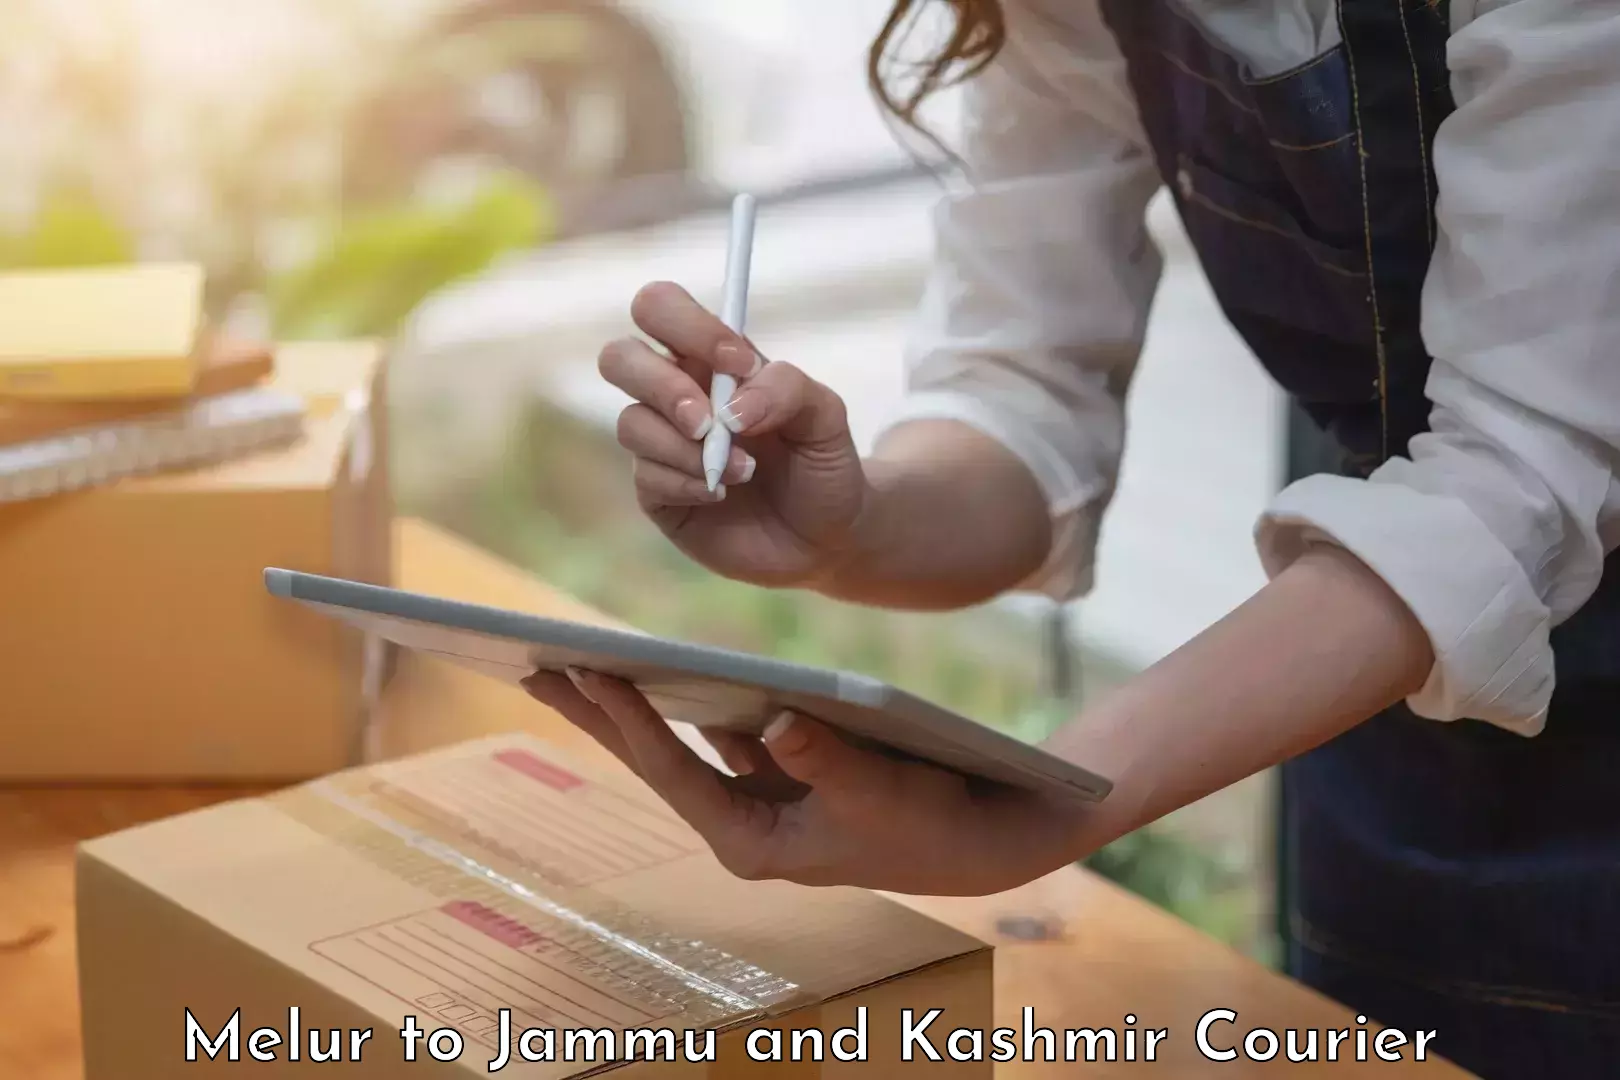 Quality moving company Melur to Jammu and Kashmir